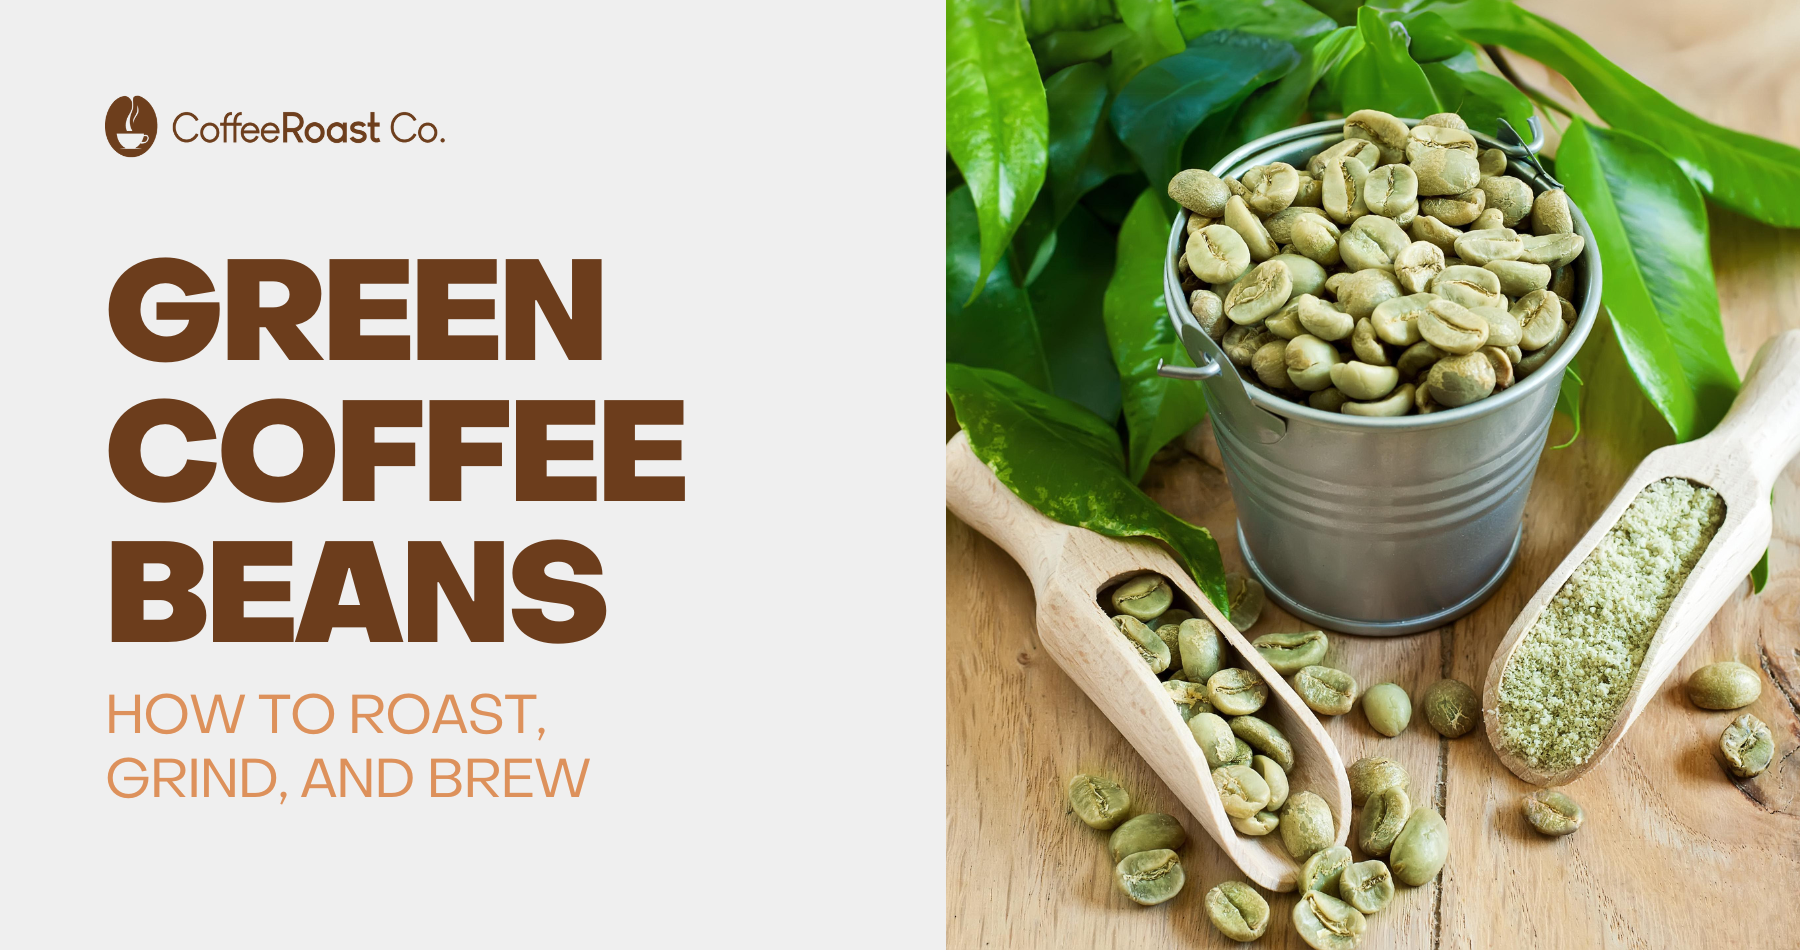 Green Coffee Beans: How to Roast, Grind and Brew Them for Maximum Health Benefits